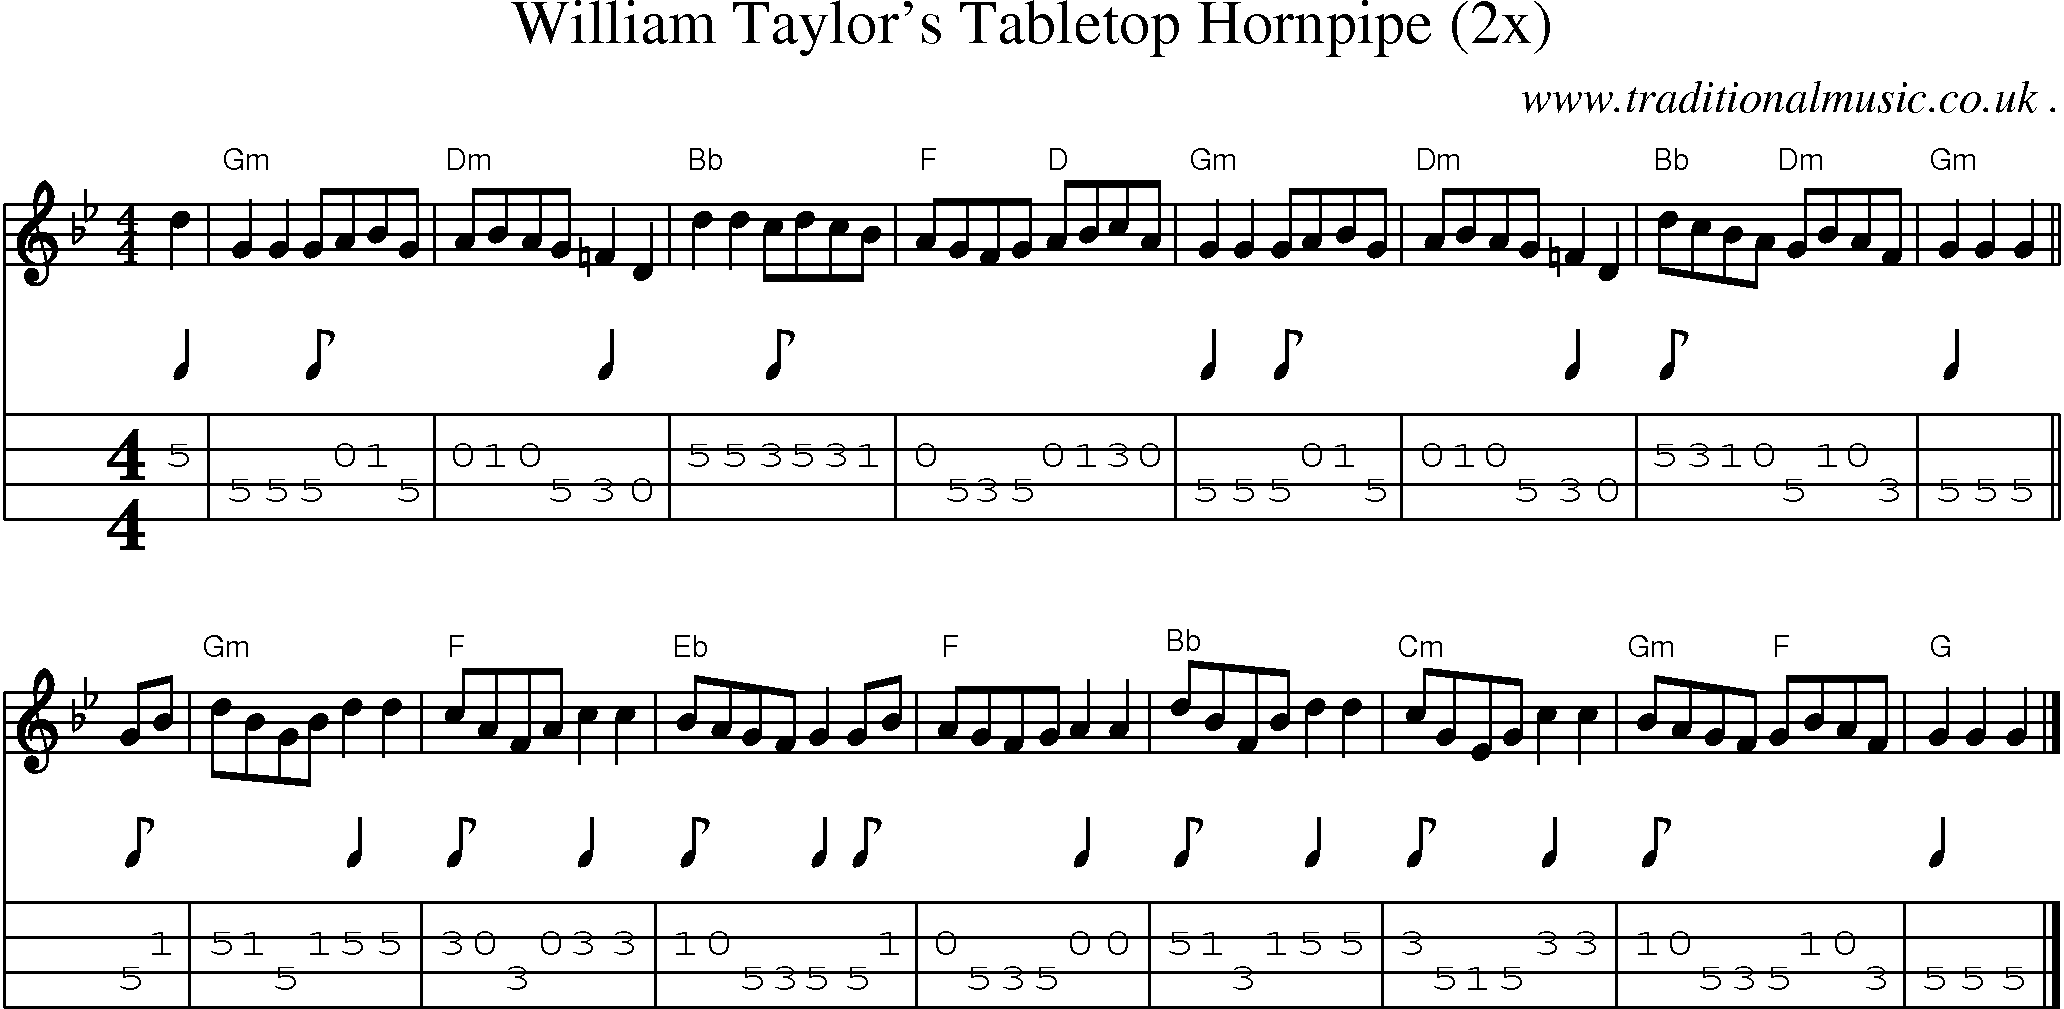 Sheet-music  score, Chords and Mandolin Tabs for William Taylors Tabletop Hornpipe 2x